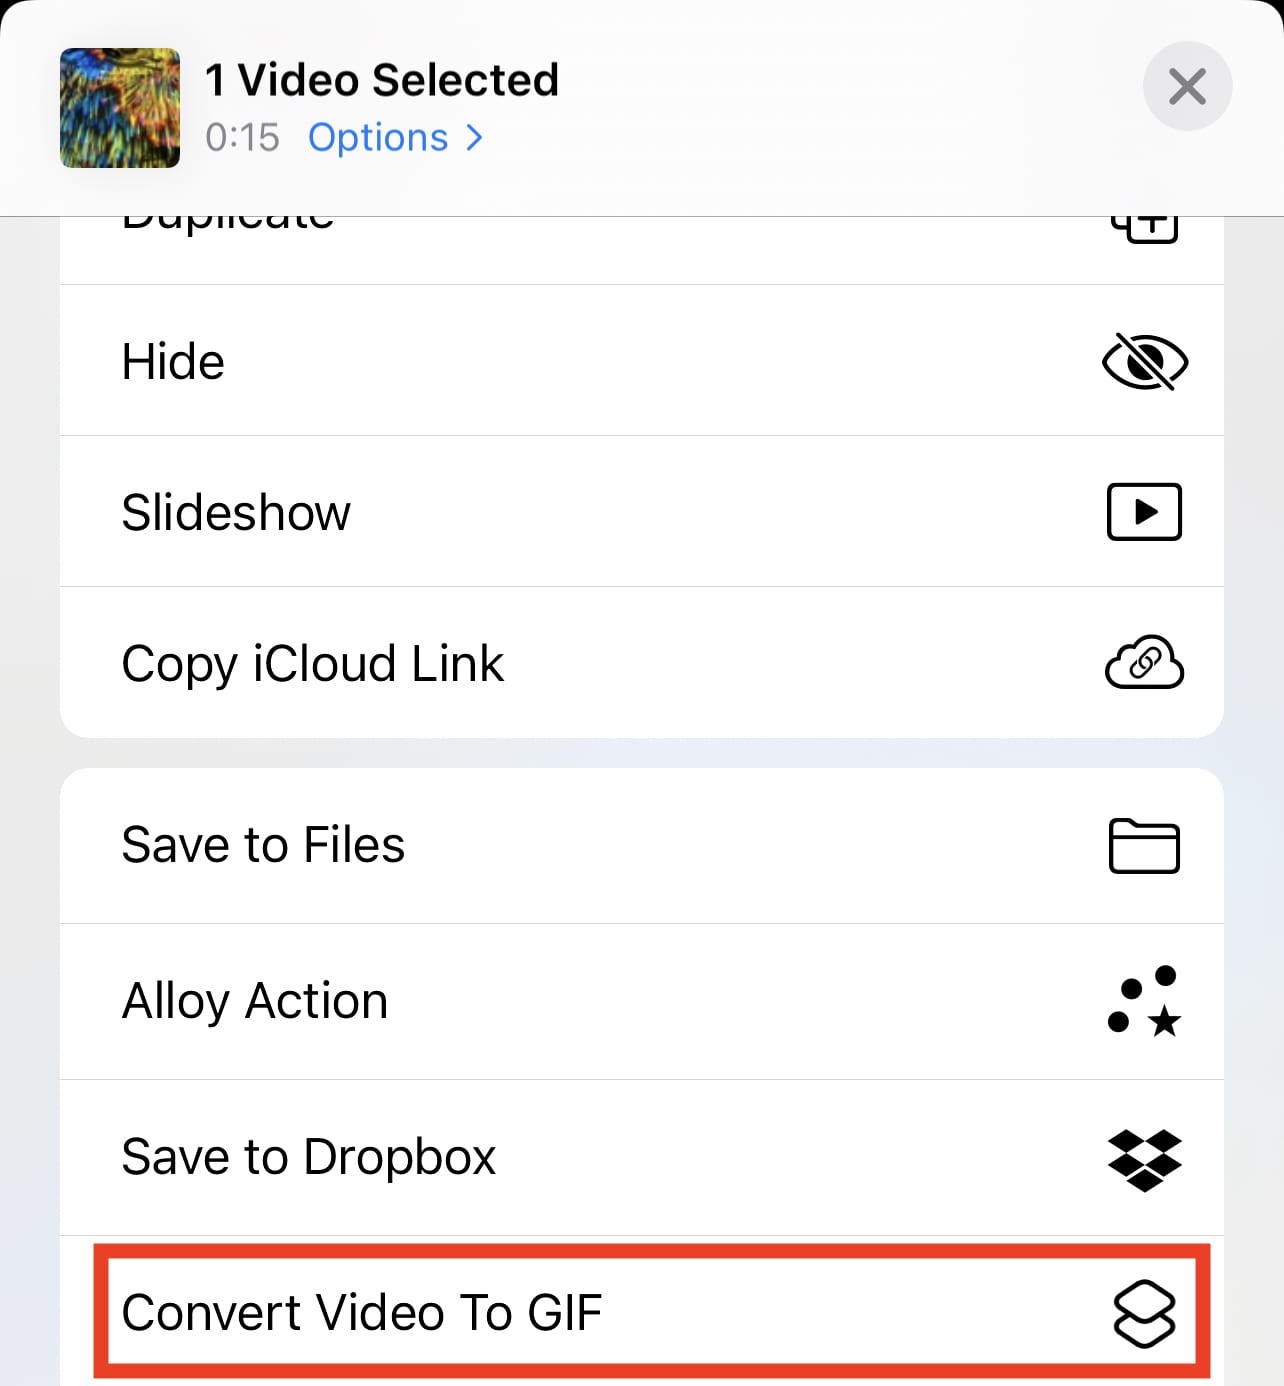 Tap Convert Video to GIF to complete the conversion